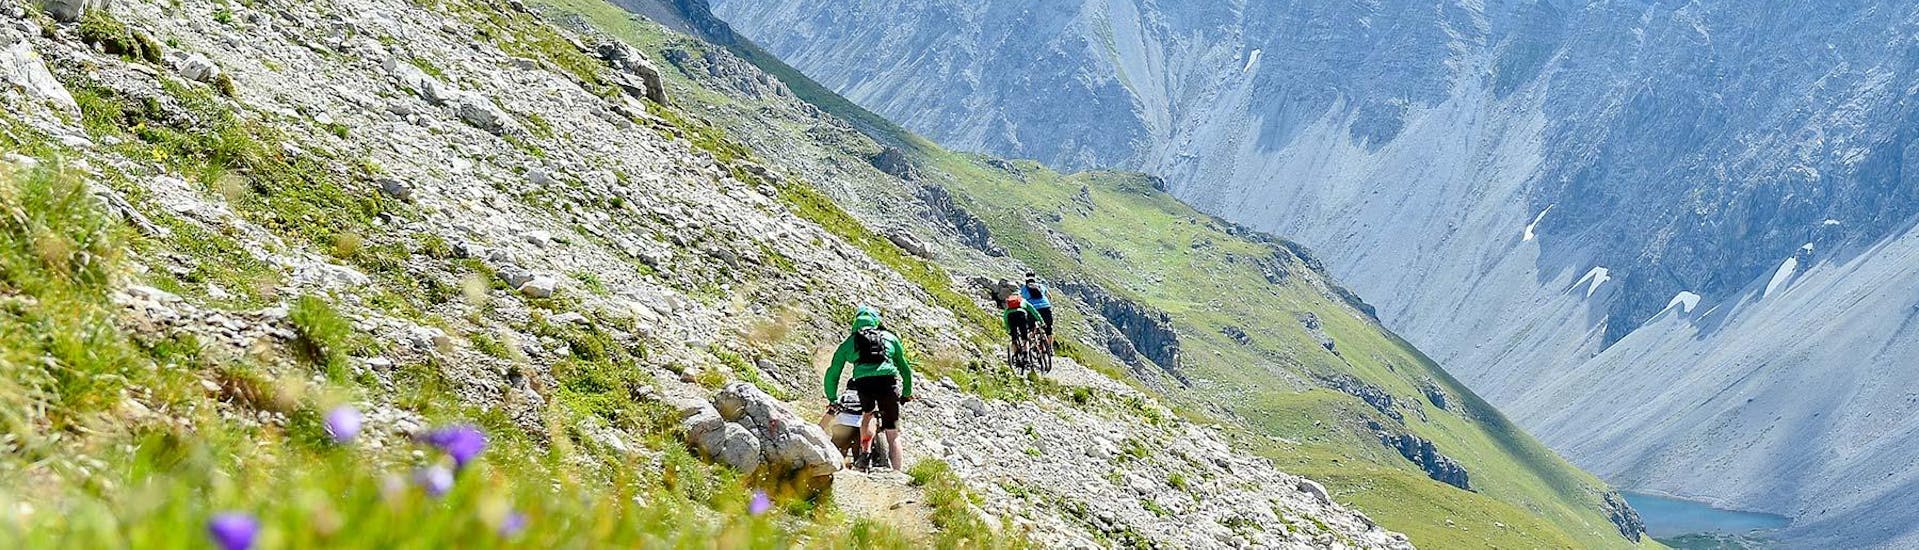 Bikers are riding through the mountains during the Private Mountain Bike Guiding in Lenzerheide with Epic Lenzerheide.